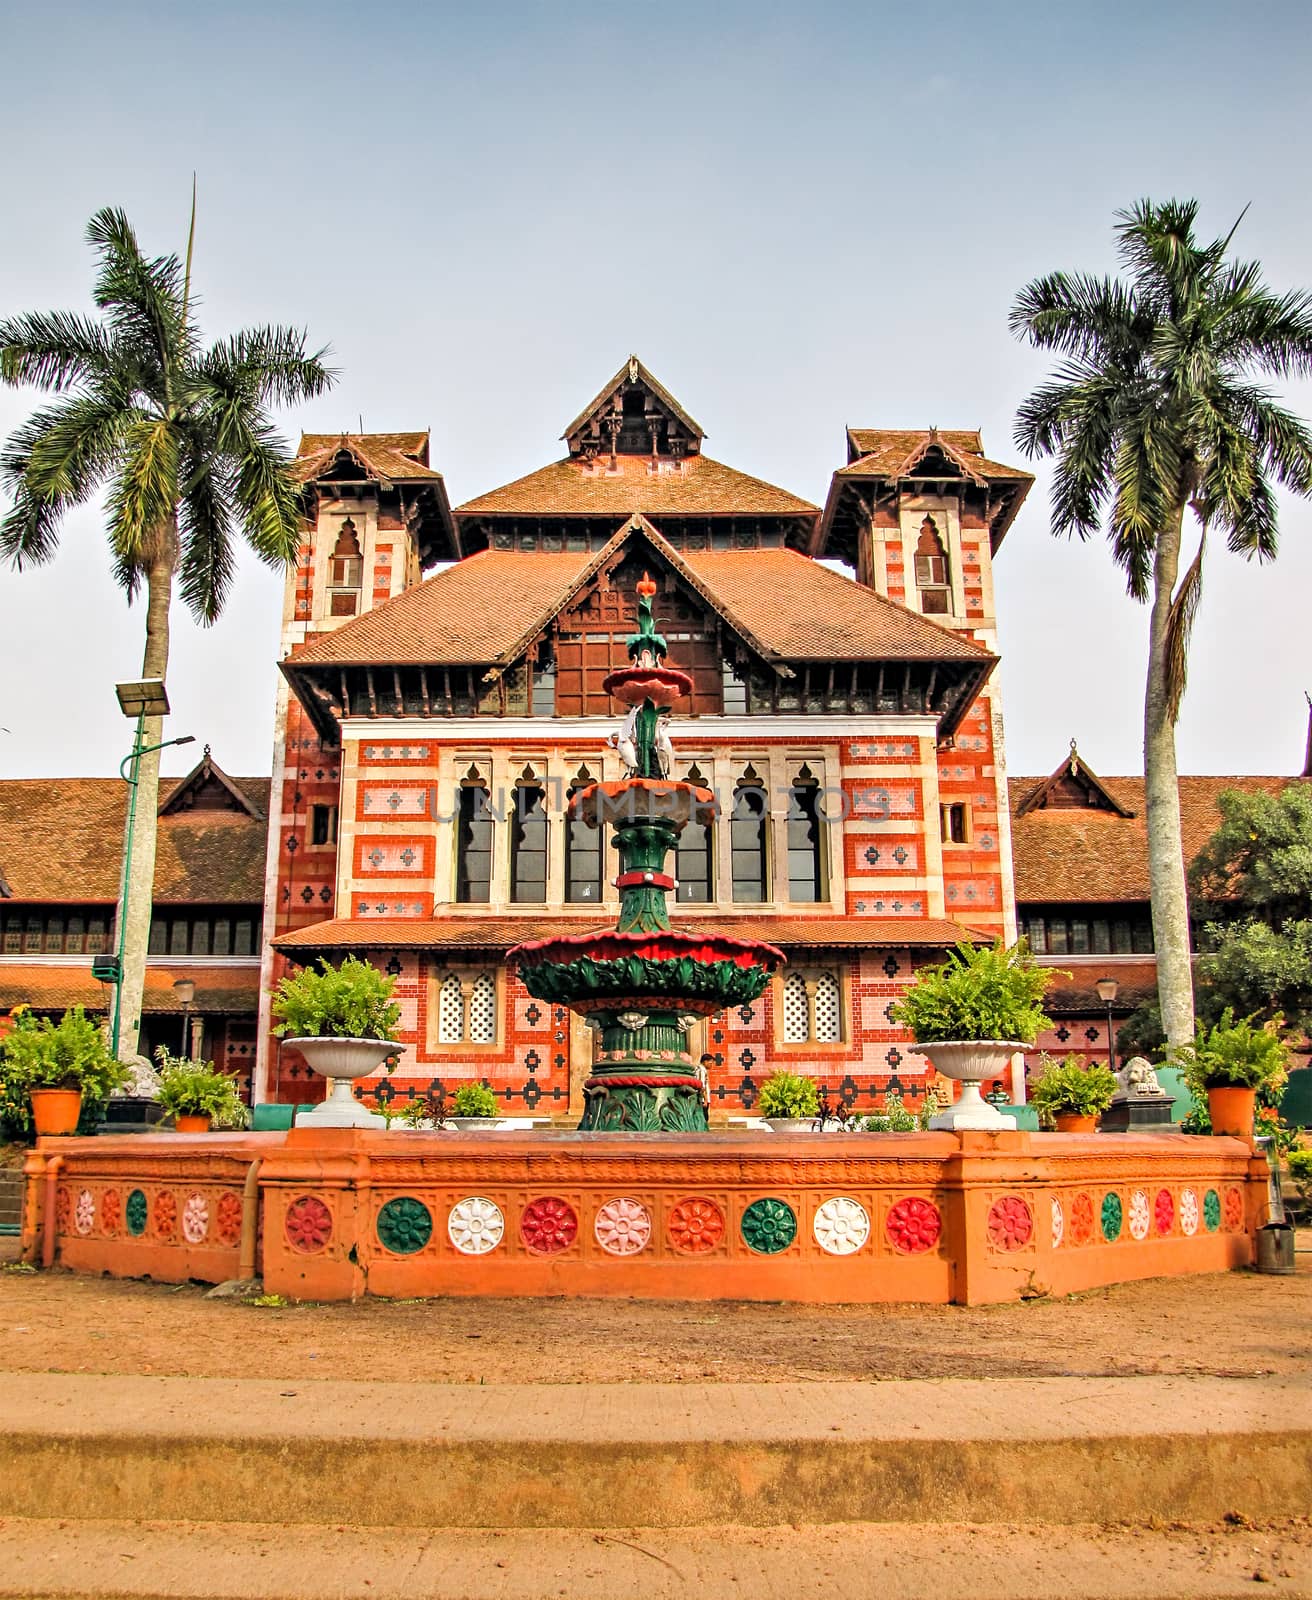 The Napier Museum is an art and natural history.It is a saracenic architecture. museum situated in Thiruvananthapuram, the capital city of Kerala, India.